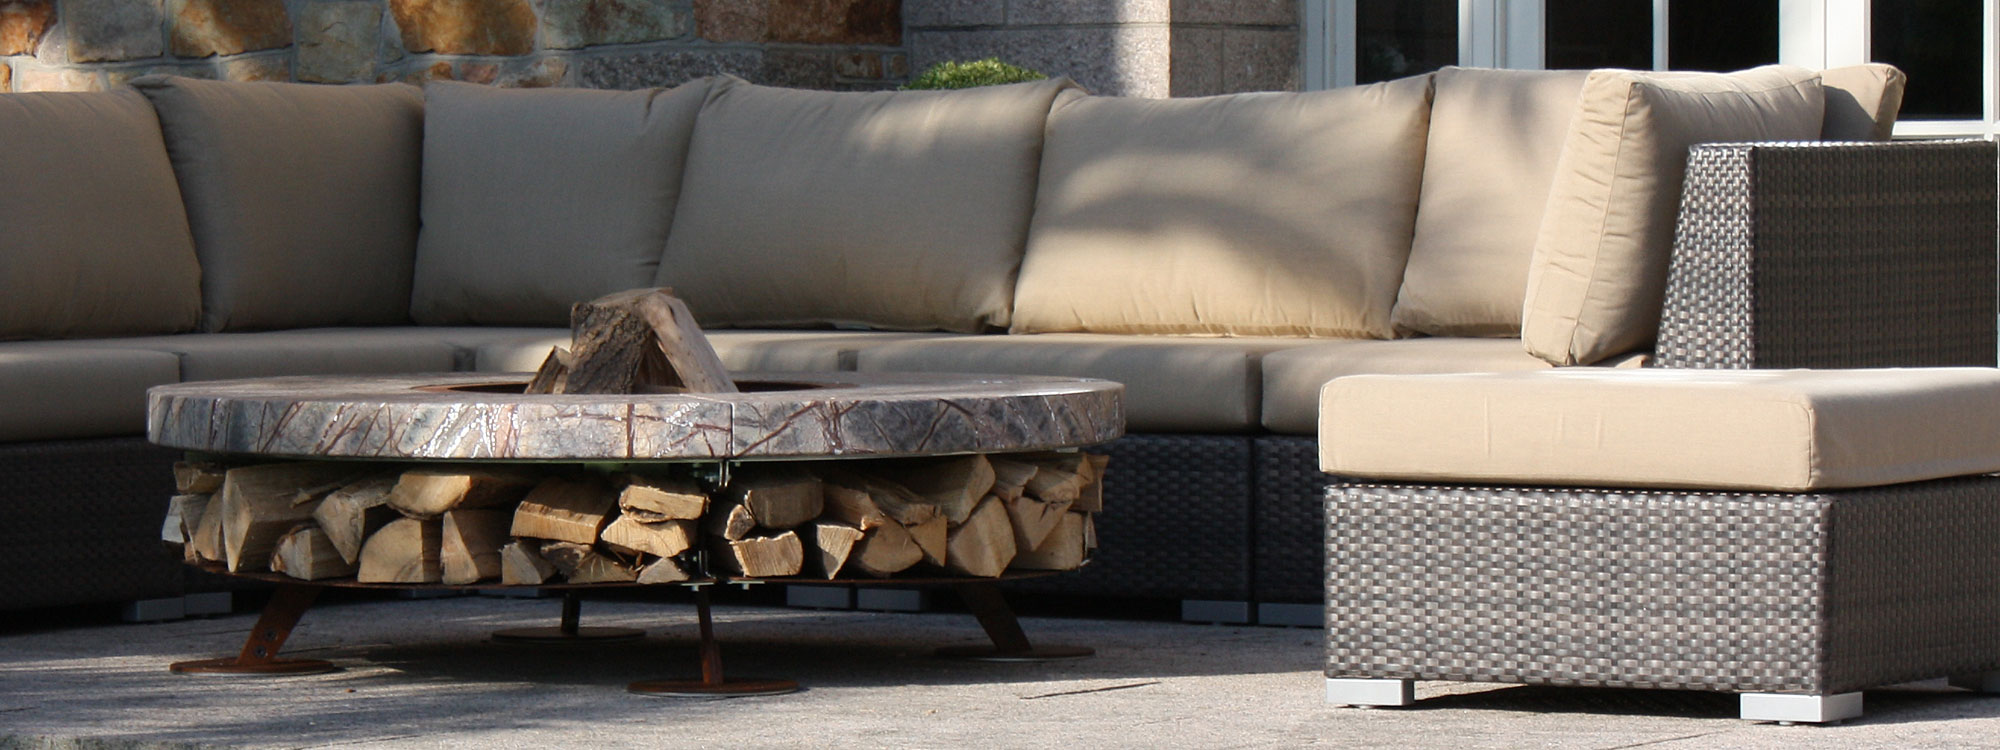 Image of AK47 Ercole luxury fire pit with marble surround, shown in the Channel Isles